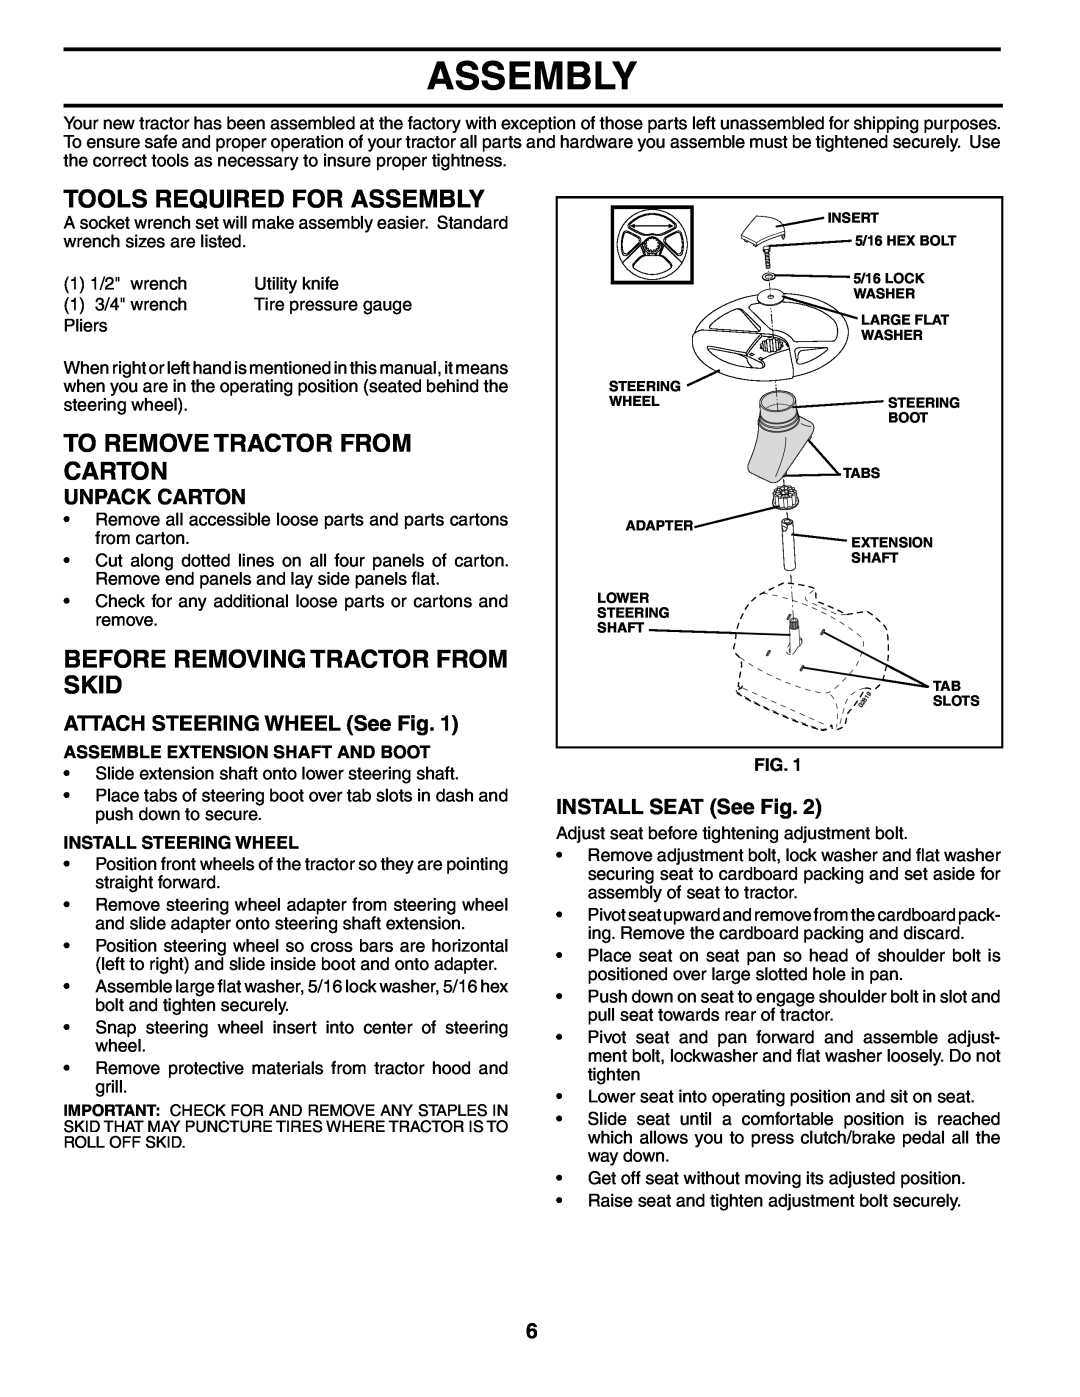 Poulan PB1638LT manual Tools Required For Assembly, To Remove Tractor From Carton, Before Removing Tractor From Skid 